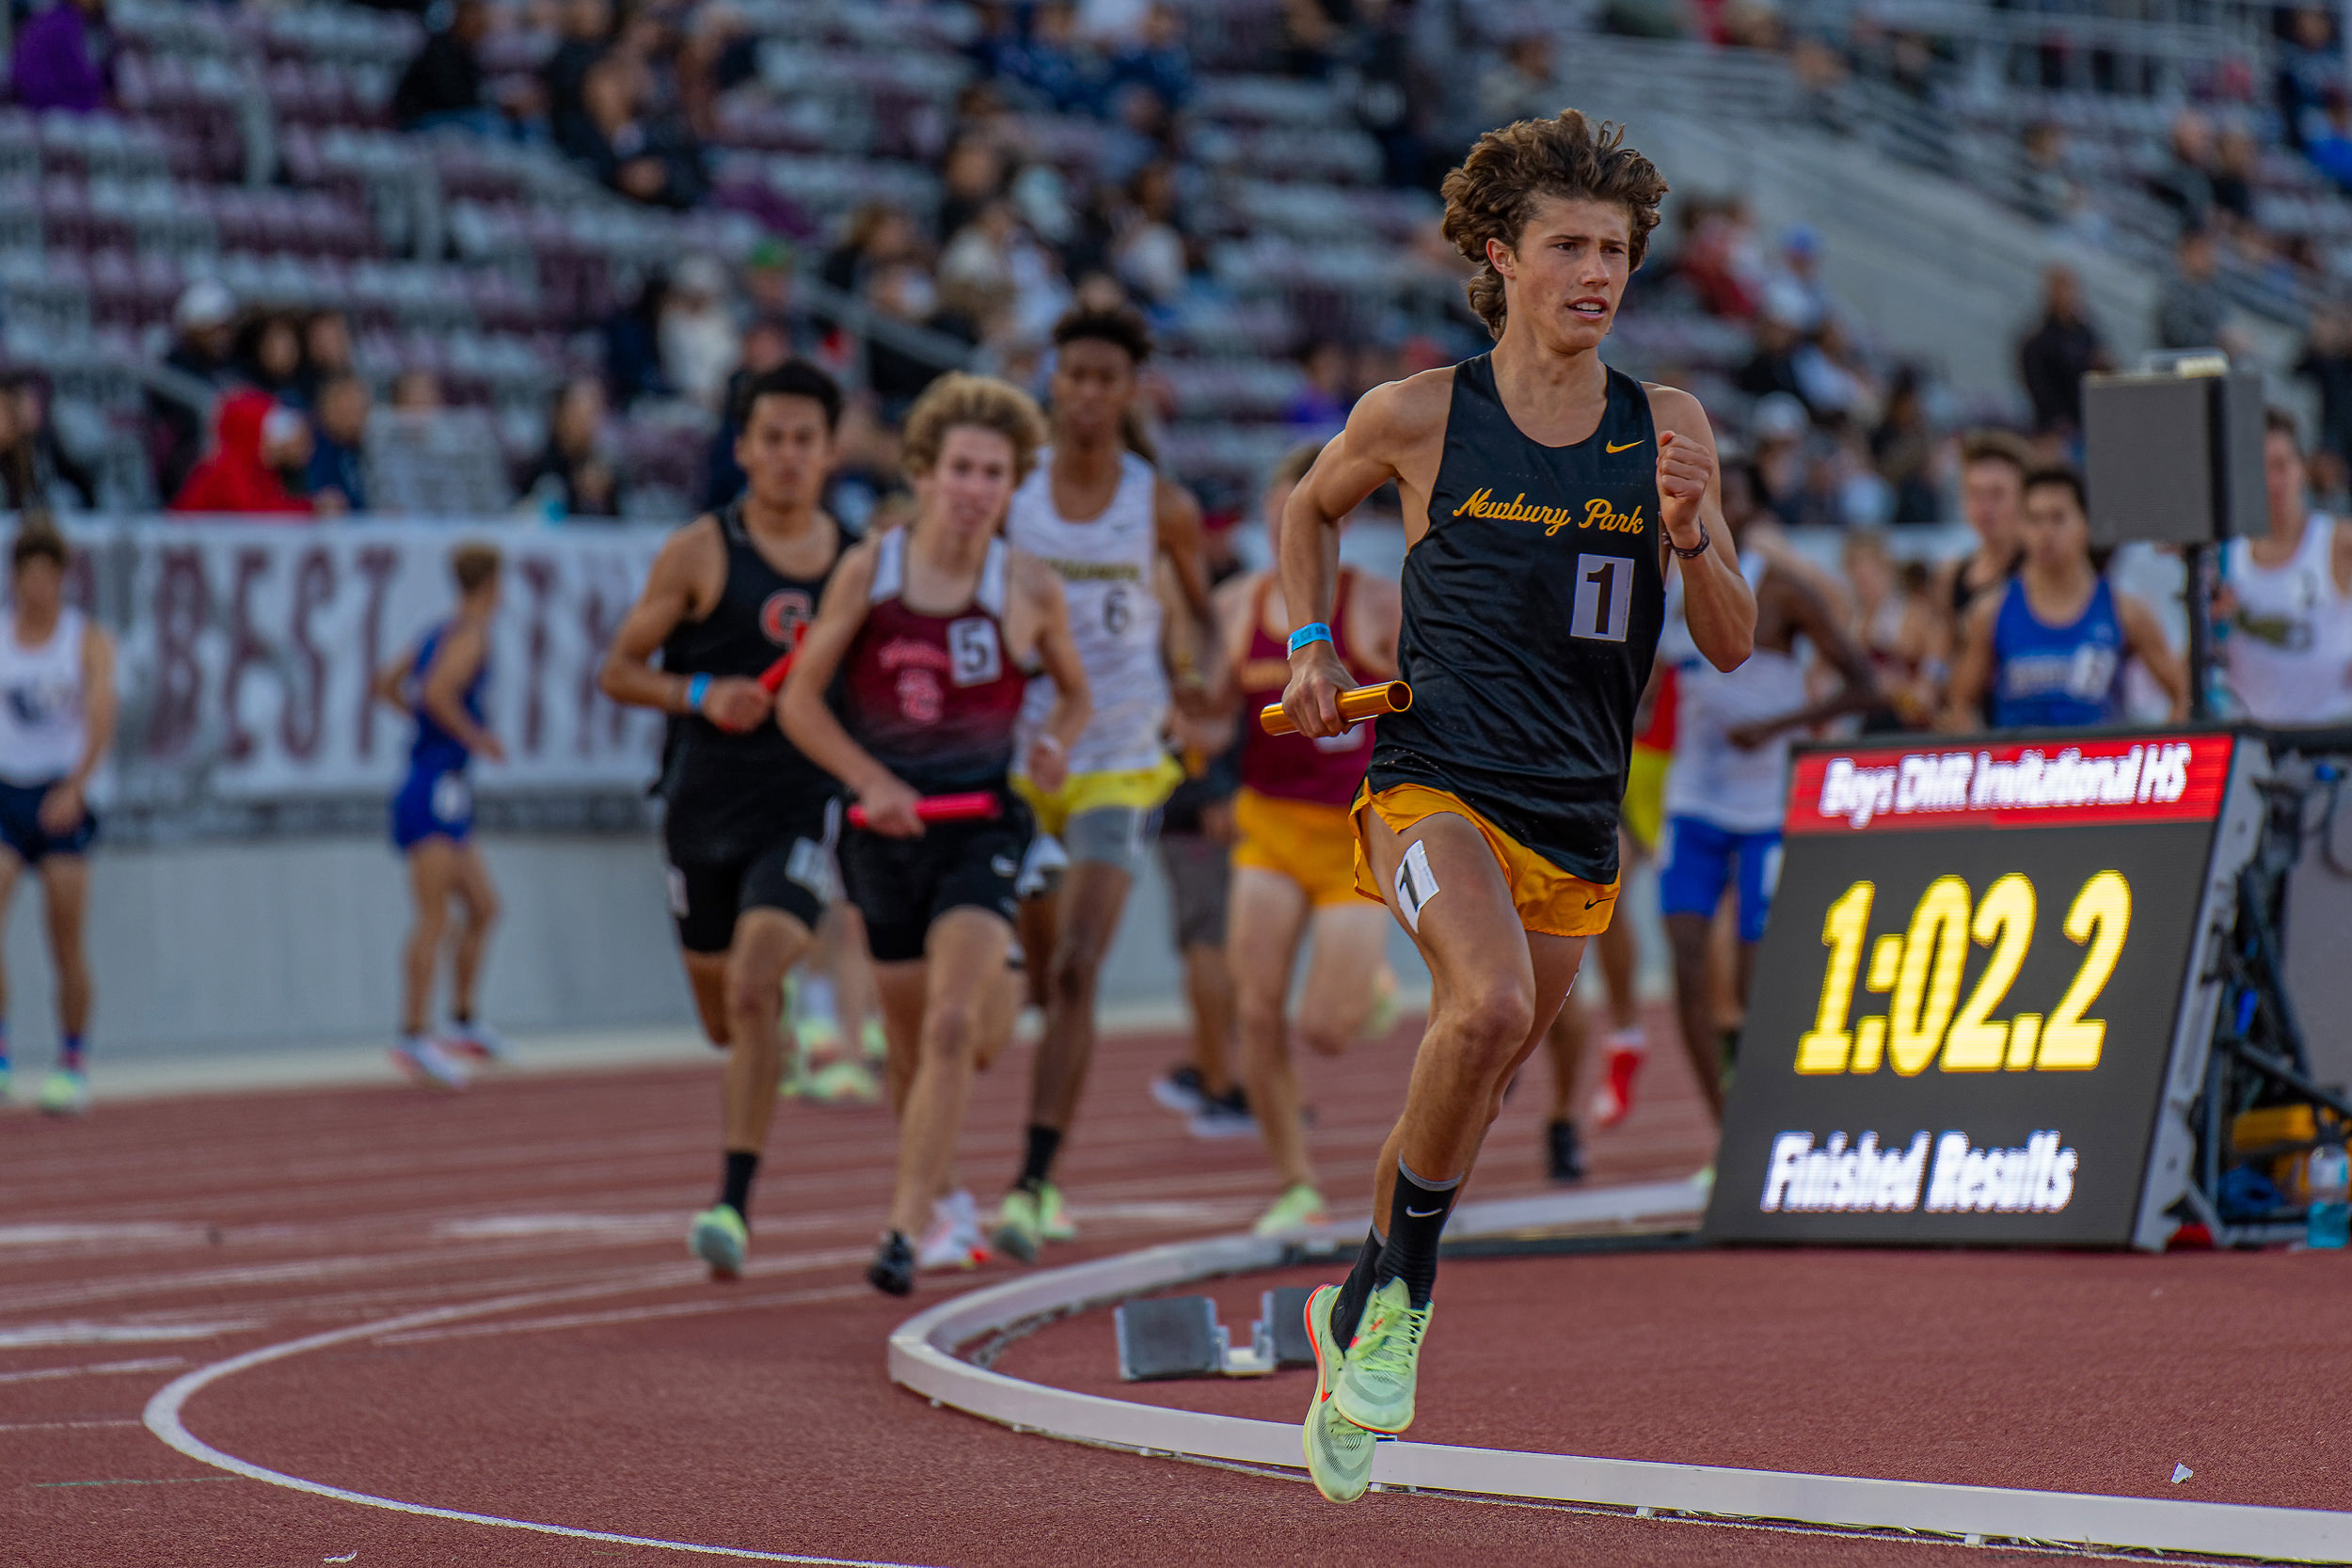 The 2022 Mt. SAC Relays